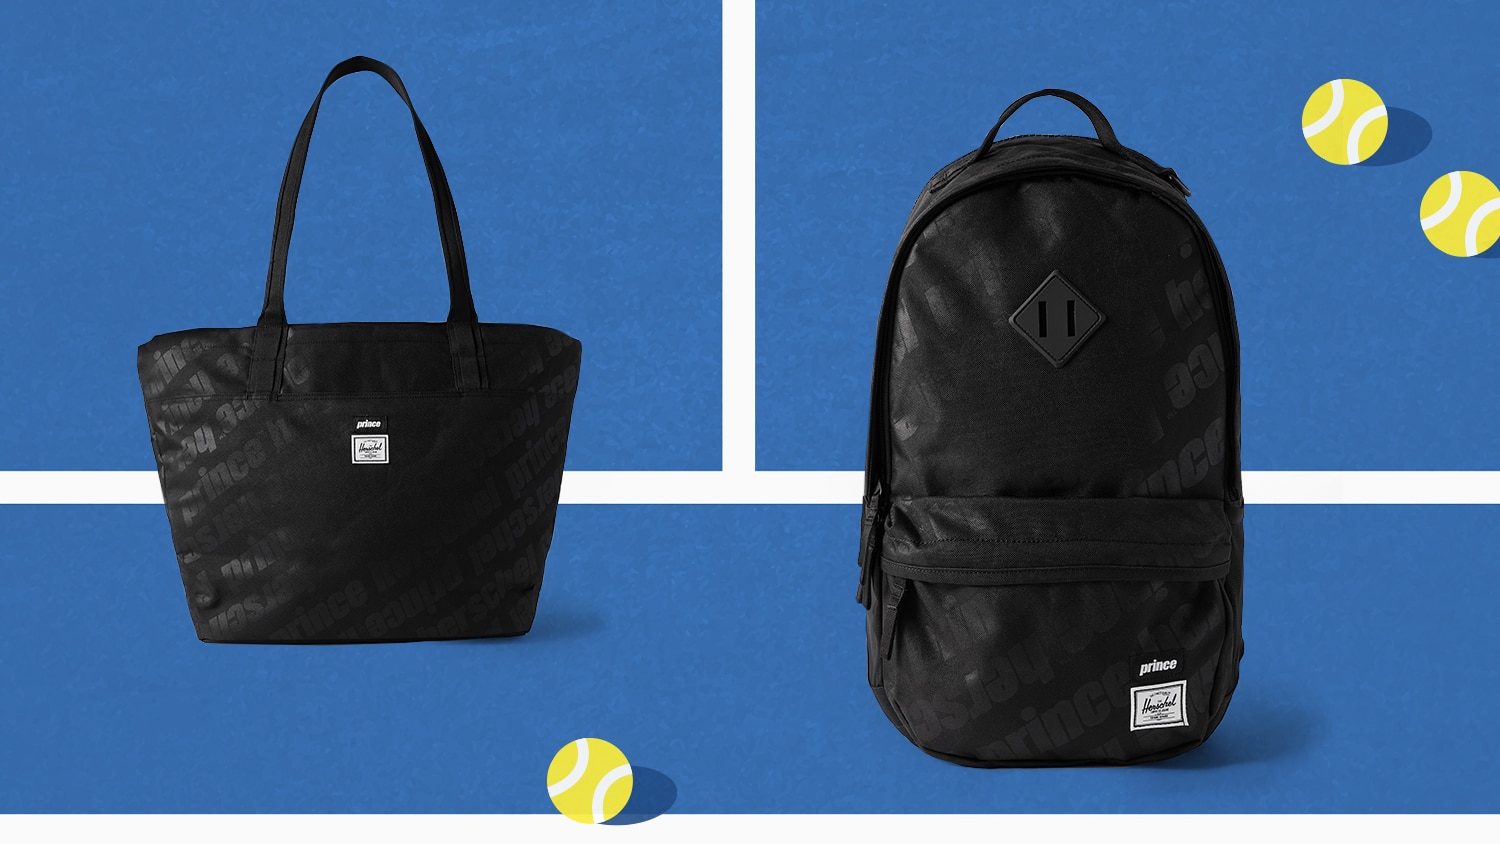 Partnership: Herschel Supply Co's Tennis Collaboration With Prince Is  Serving Up Aces | The Journal | MR PORTER